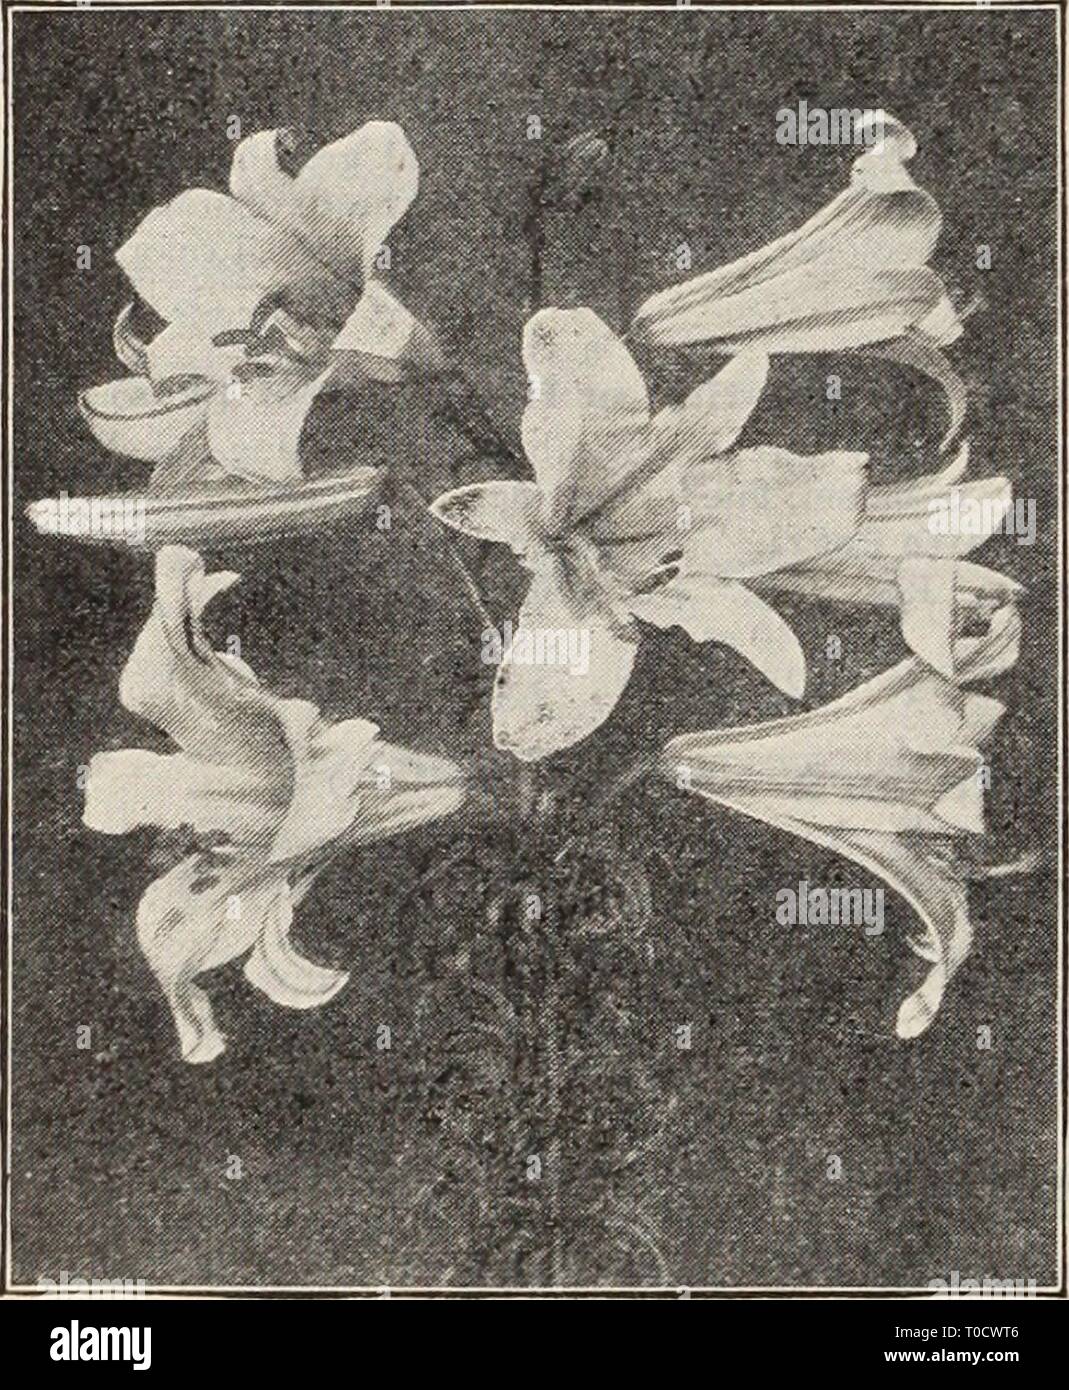 Dreer's garden book  Henry Dreer's garden book / Henry A. Dreer. dreersgardenbook1931dree Year:   10    Double Stock-flowered Larkspur per pi Liatris (Blazing Star, or Gay Feather) 2982 Pycnostachya. Most showy and attractive hardy perennial native plants, with long spikes of rosy- purple flowers from July to September; 3 to 4 feet.  oz., 50 cts $0 10 Lilium Regale Liliums 2987 Philippinense Formosanum. A truly remarkable lily, with umbels of large white long trumpet shaped flowers, like an Easter Lily. Will bloom in 6 to 8 months from the time seeds are sown; very fragrant. 2 to 3 feet. Spec Stock Photo